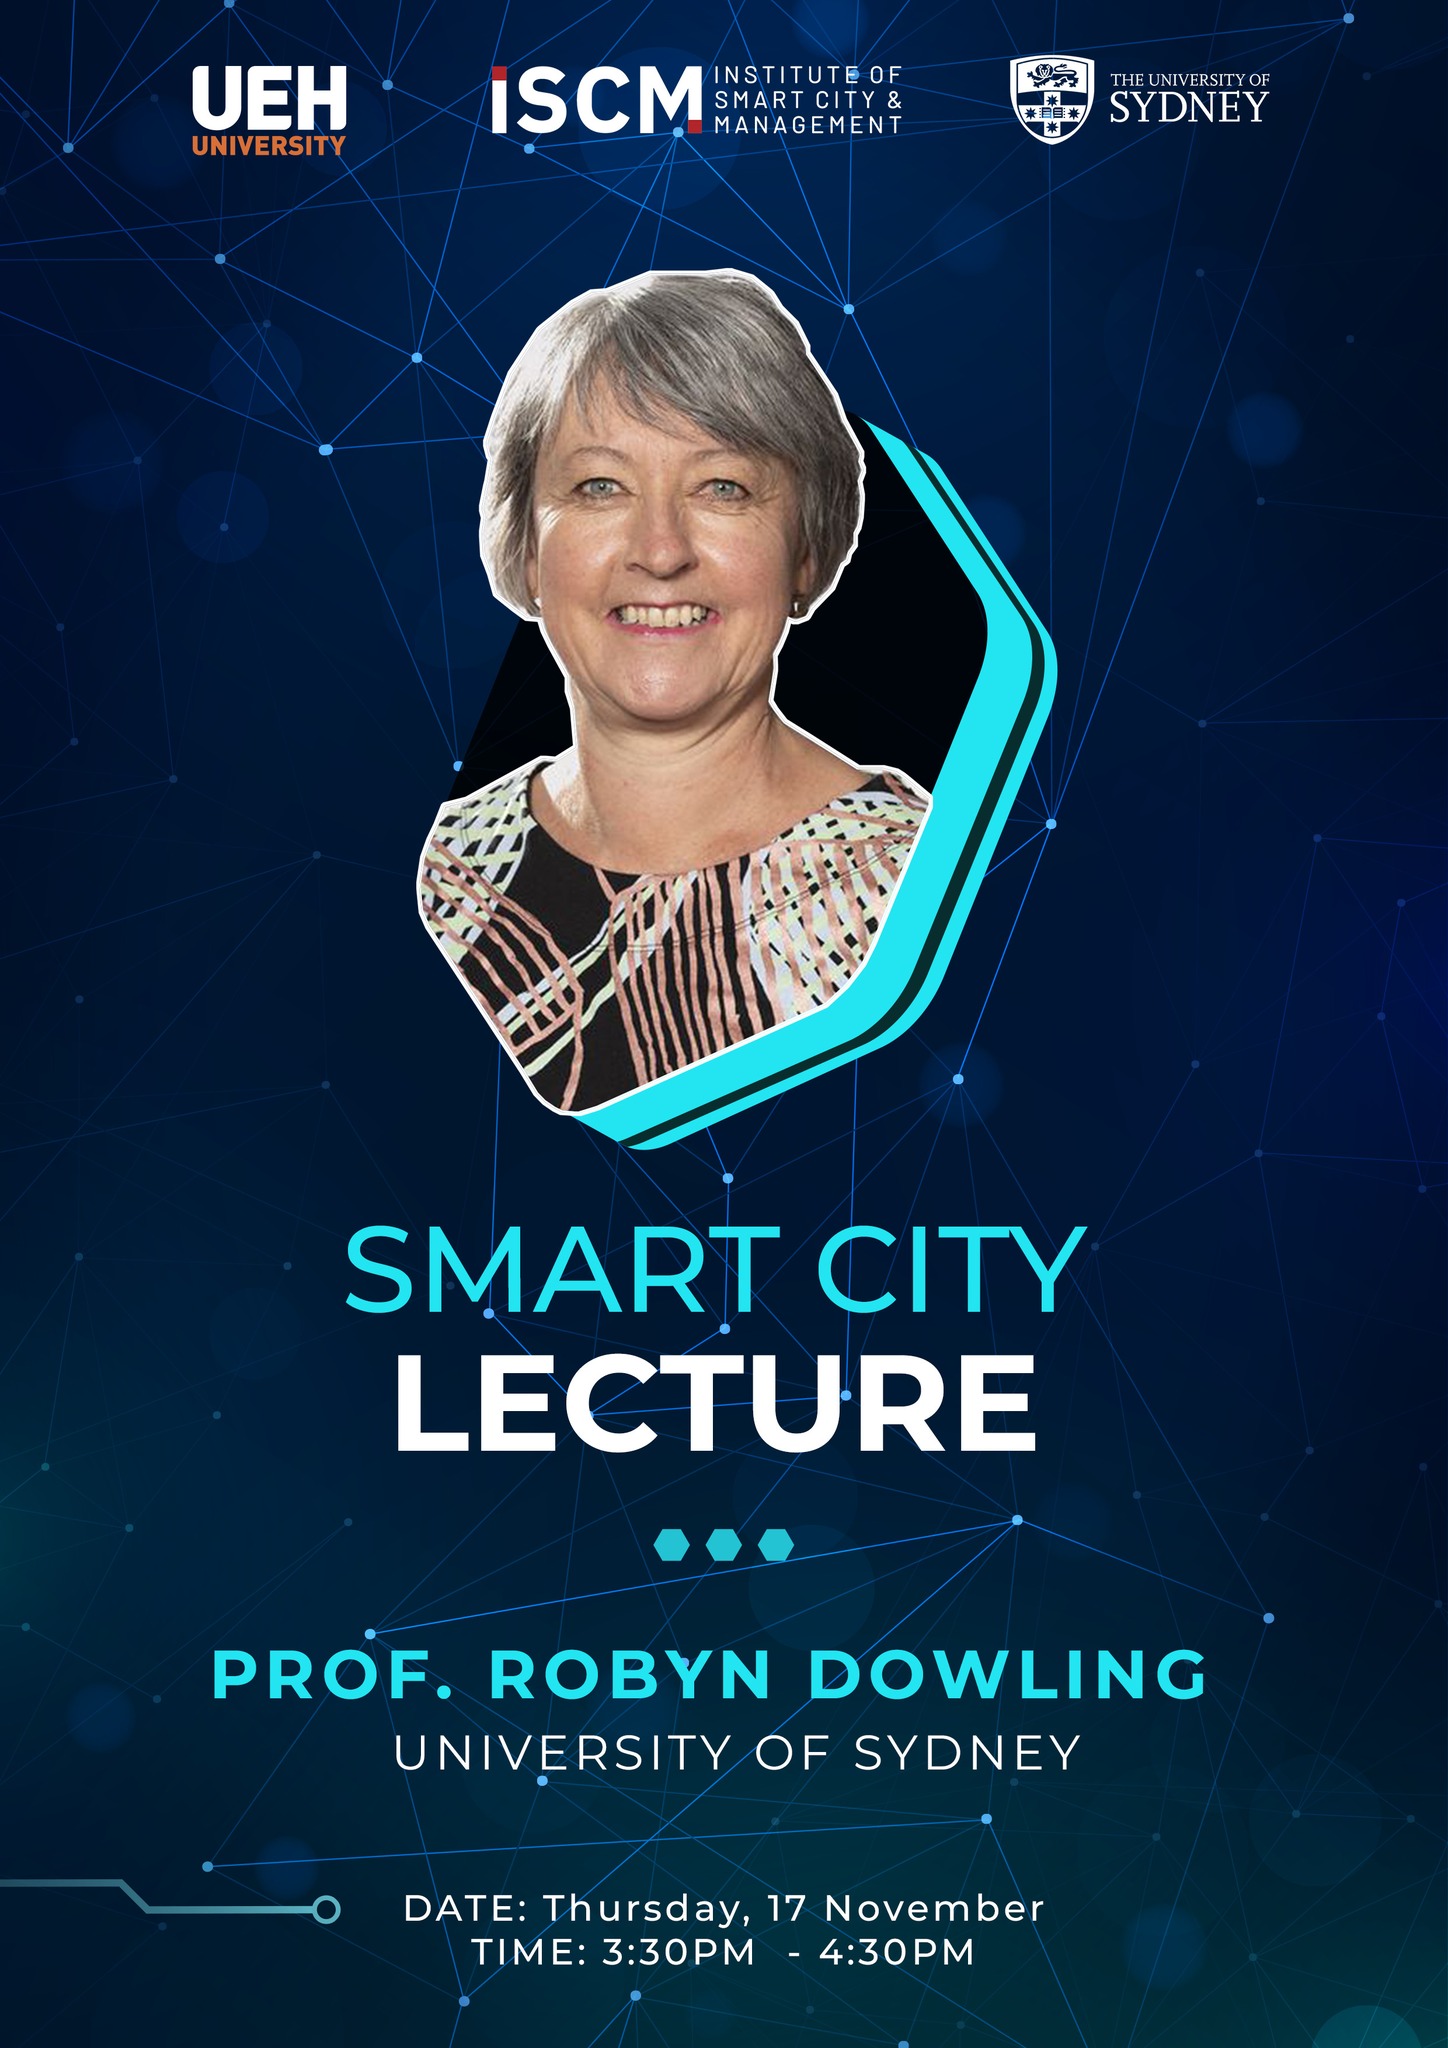 [SPECIAL LECTURE] SMART CITY 